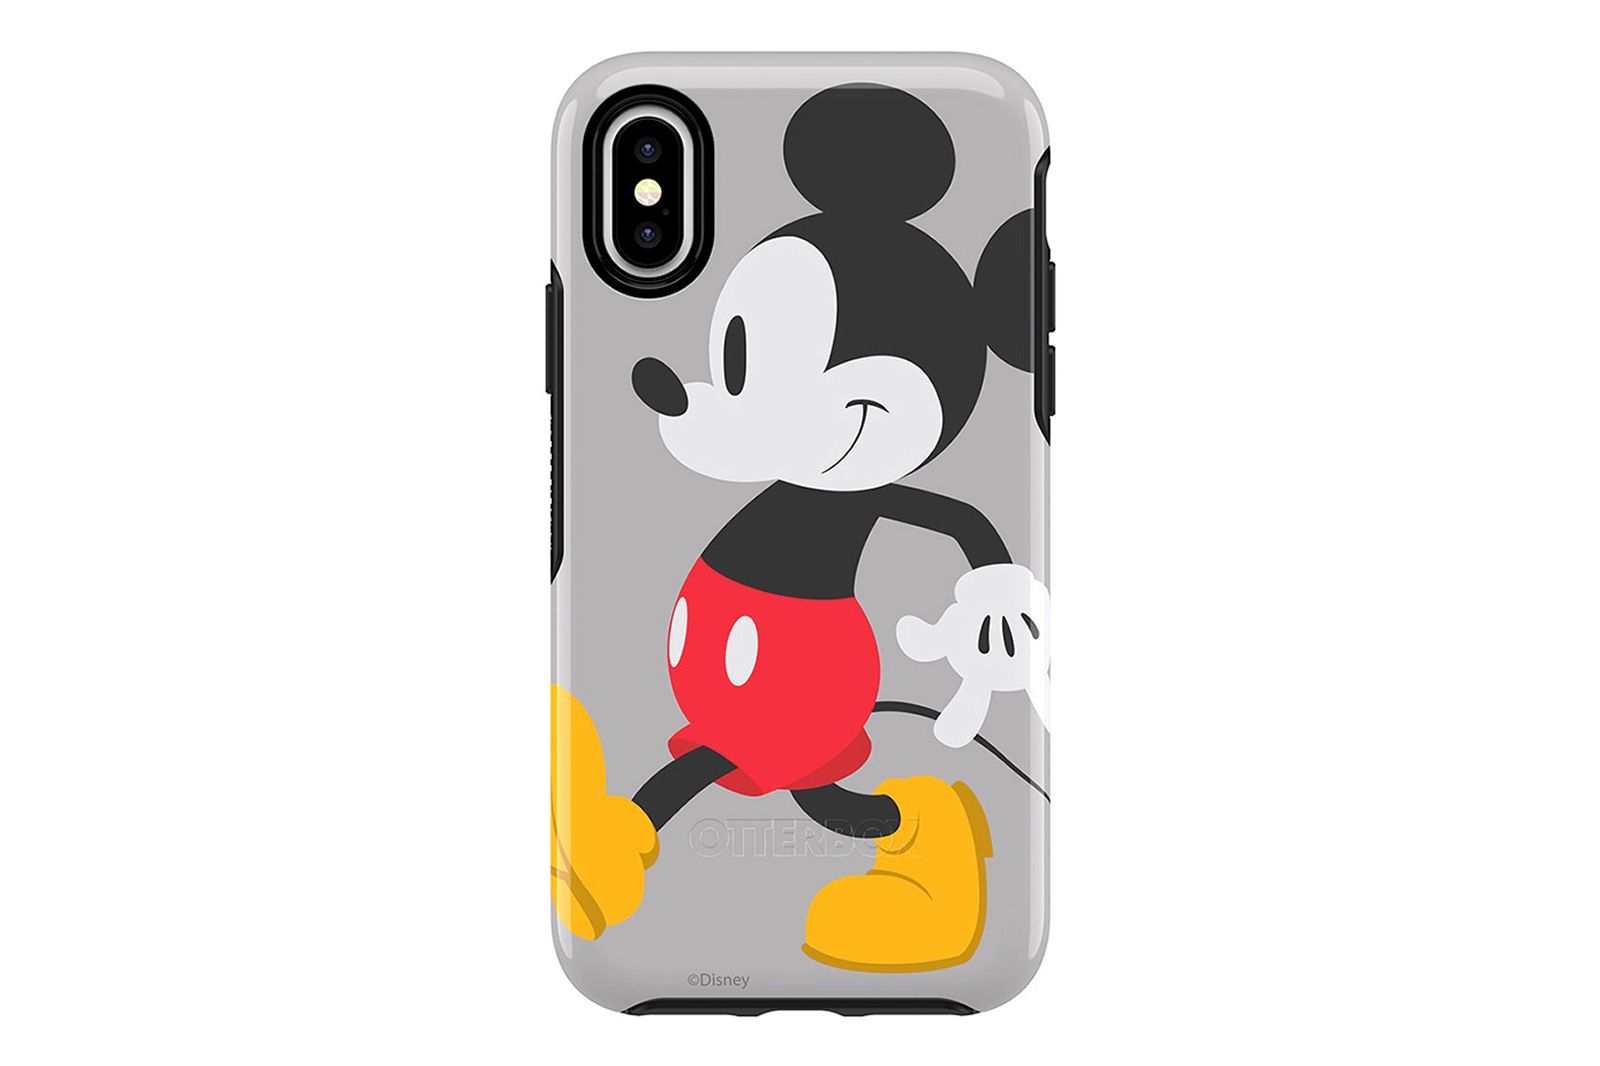 Best Disney Otterbox cases Protection fit for a Princess or a mouse image 2